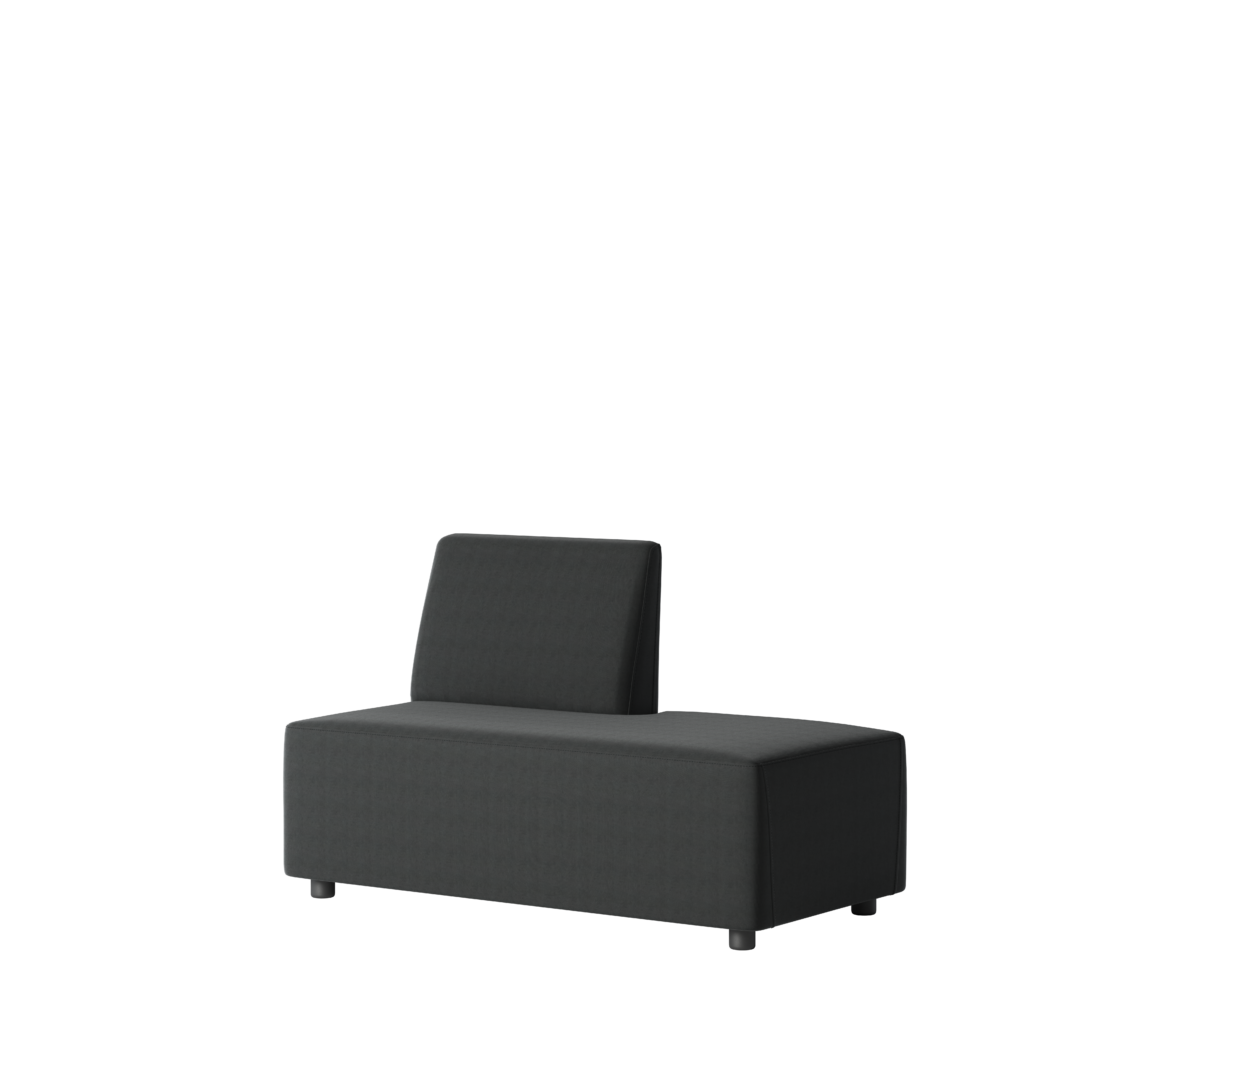 OCEE&FOUR – Soft Seating – FourLikes Sofa – Open End 1400 Left - Low Back Right - Packshot Image 1